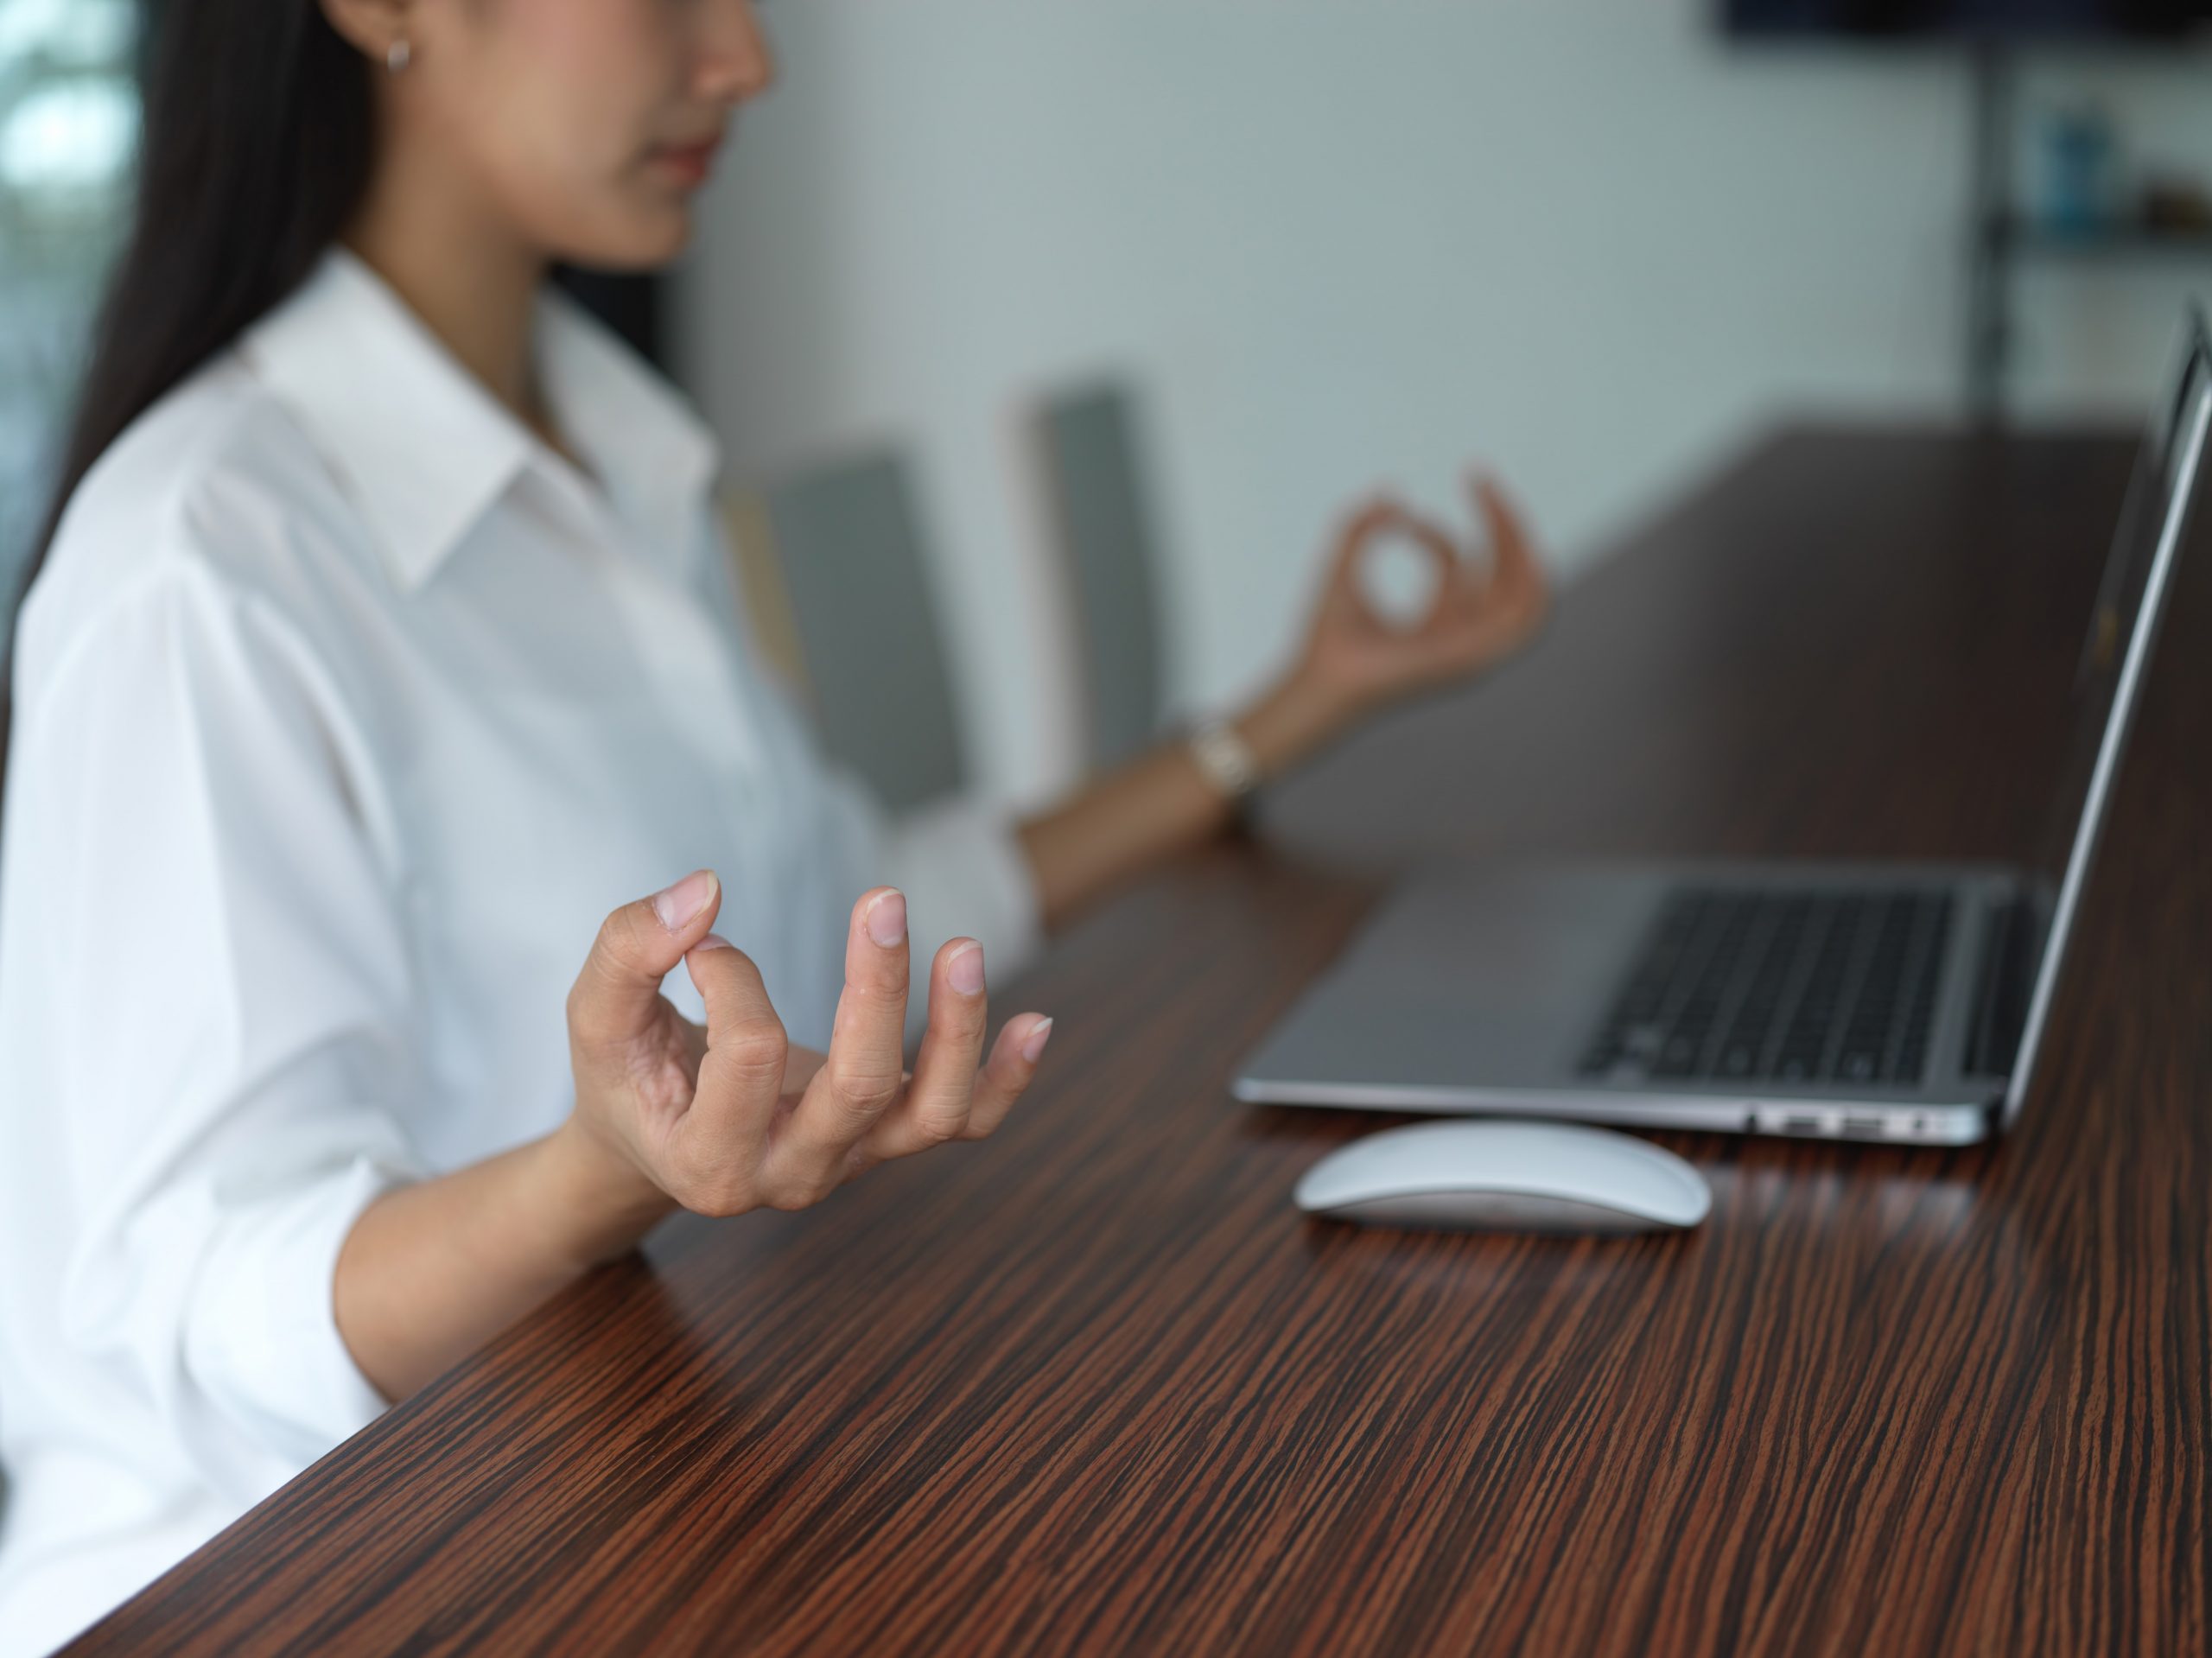 Yoga moves at the desk, stretches, woman sitting at desk practising meditation, wellbeing